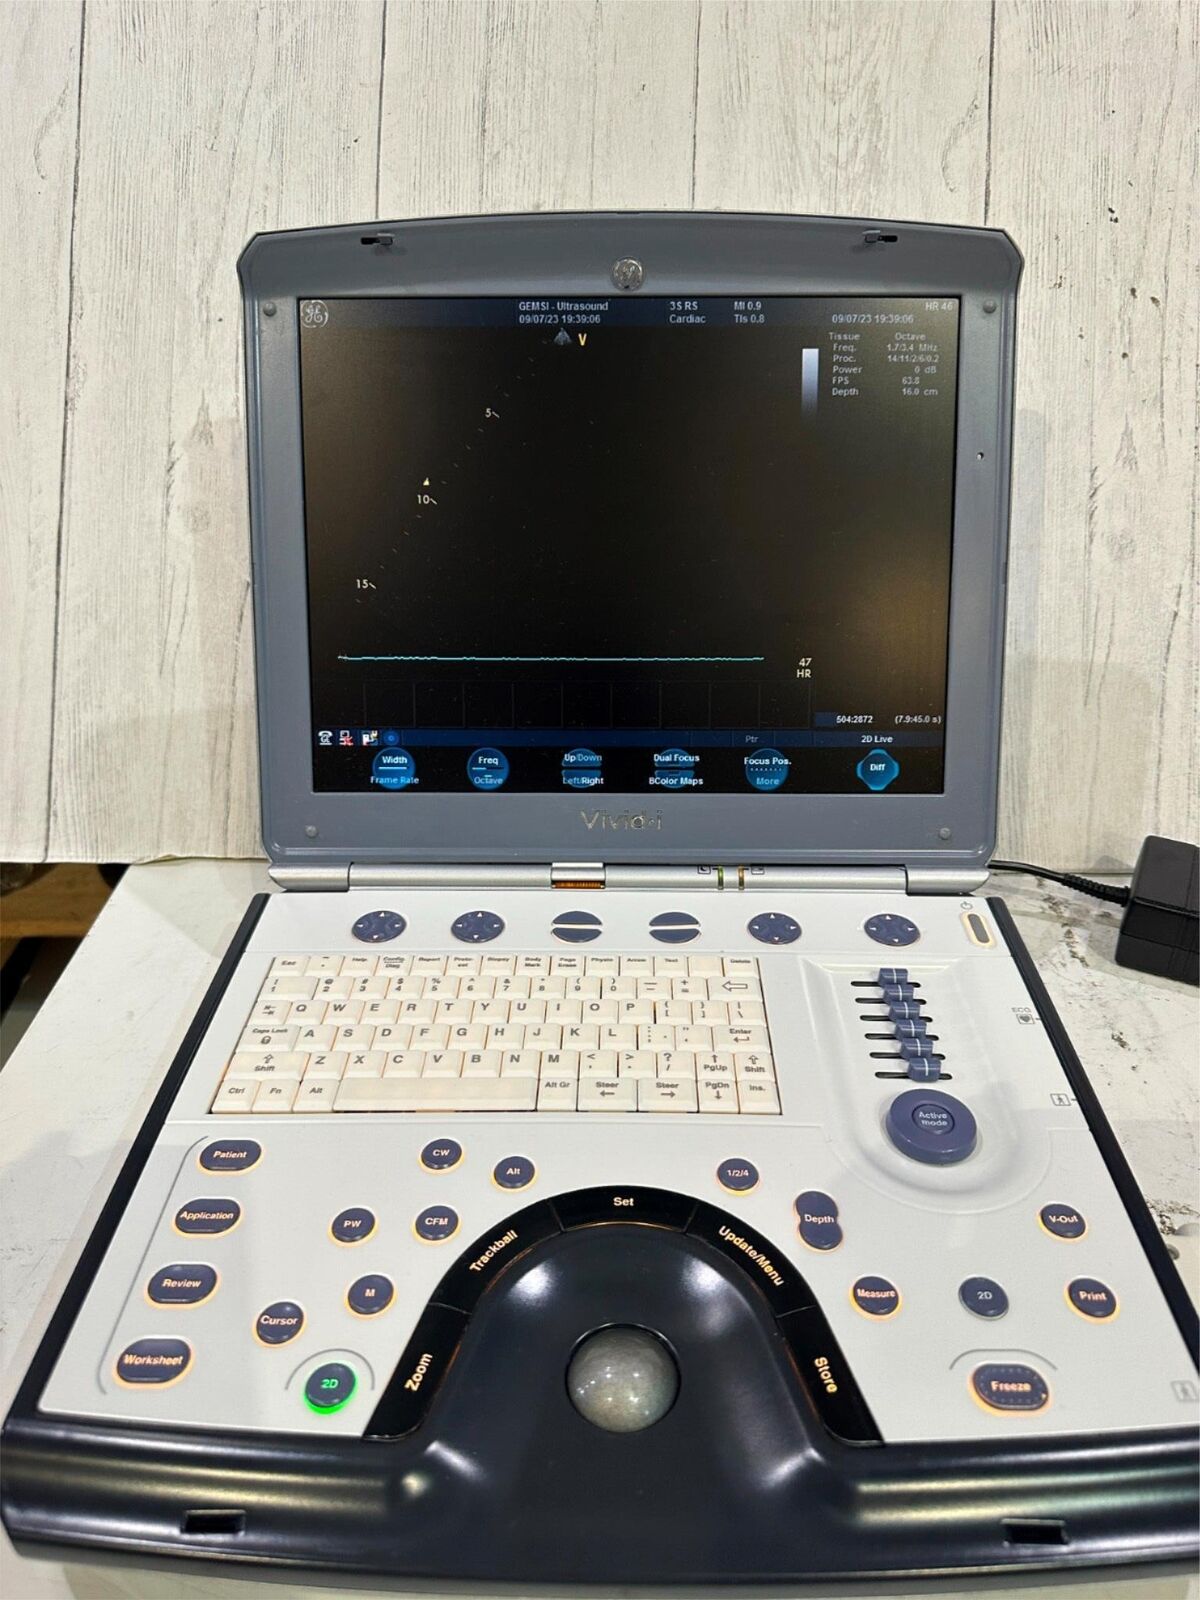 BT12 GE VIVID I PORTABLE ULTRASOUND MACHINE &3S -RS PROBE 2007, ALL OPTIONS DIAGNOSTIC ULTRASOUND MACHINES FOR SALE